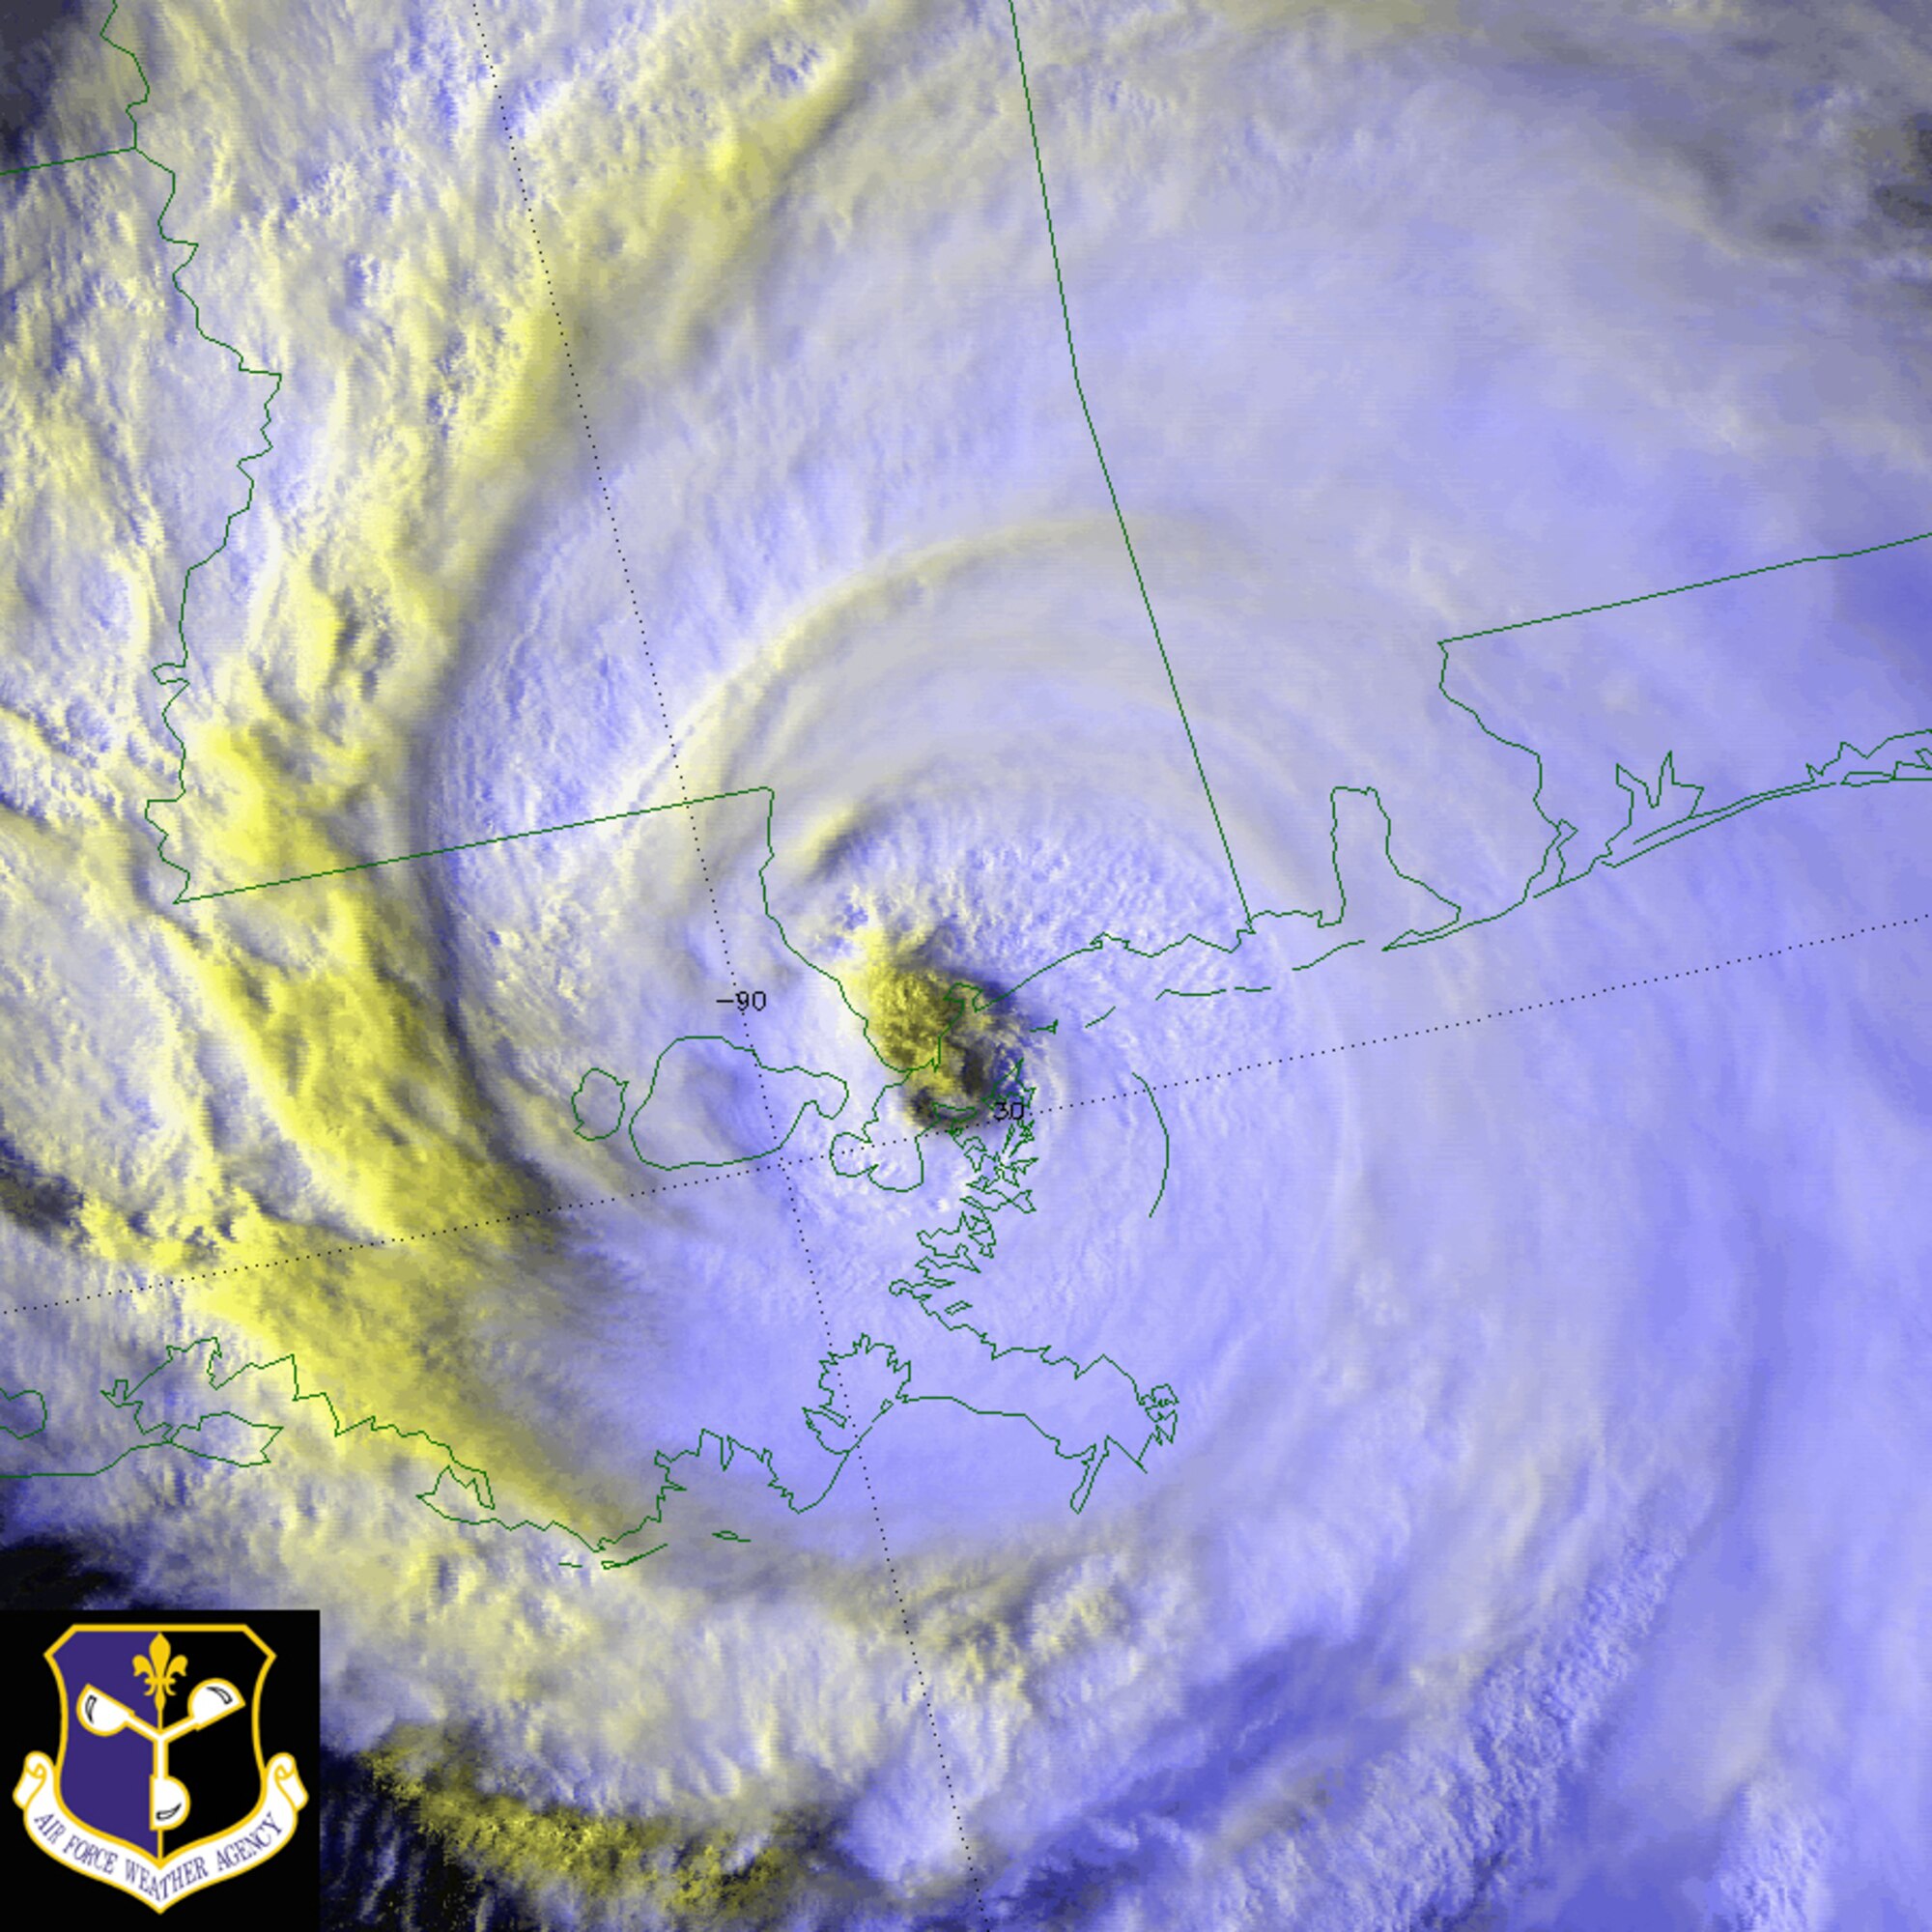 A Defense Meteorological Satellite Program satellite image of Hurricane Katrina as it made landfall on the Gulf Coast of the United States Aug. 29, 2005. The DMSP F-15 satellite provides multispectral images that use both infrared and visual satellite imagery to produce a color composite that reveals cloud depths and layers. Image courtesy of the Air Force Weather Agency. 